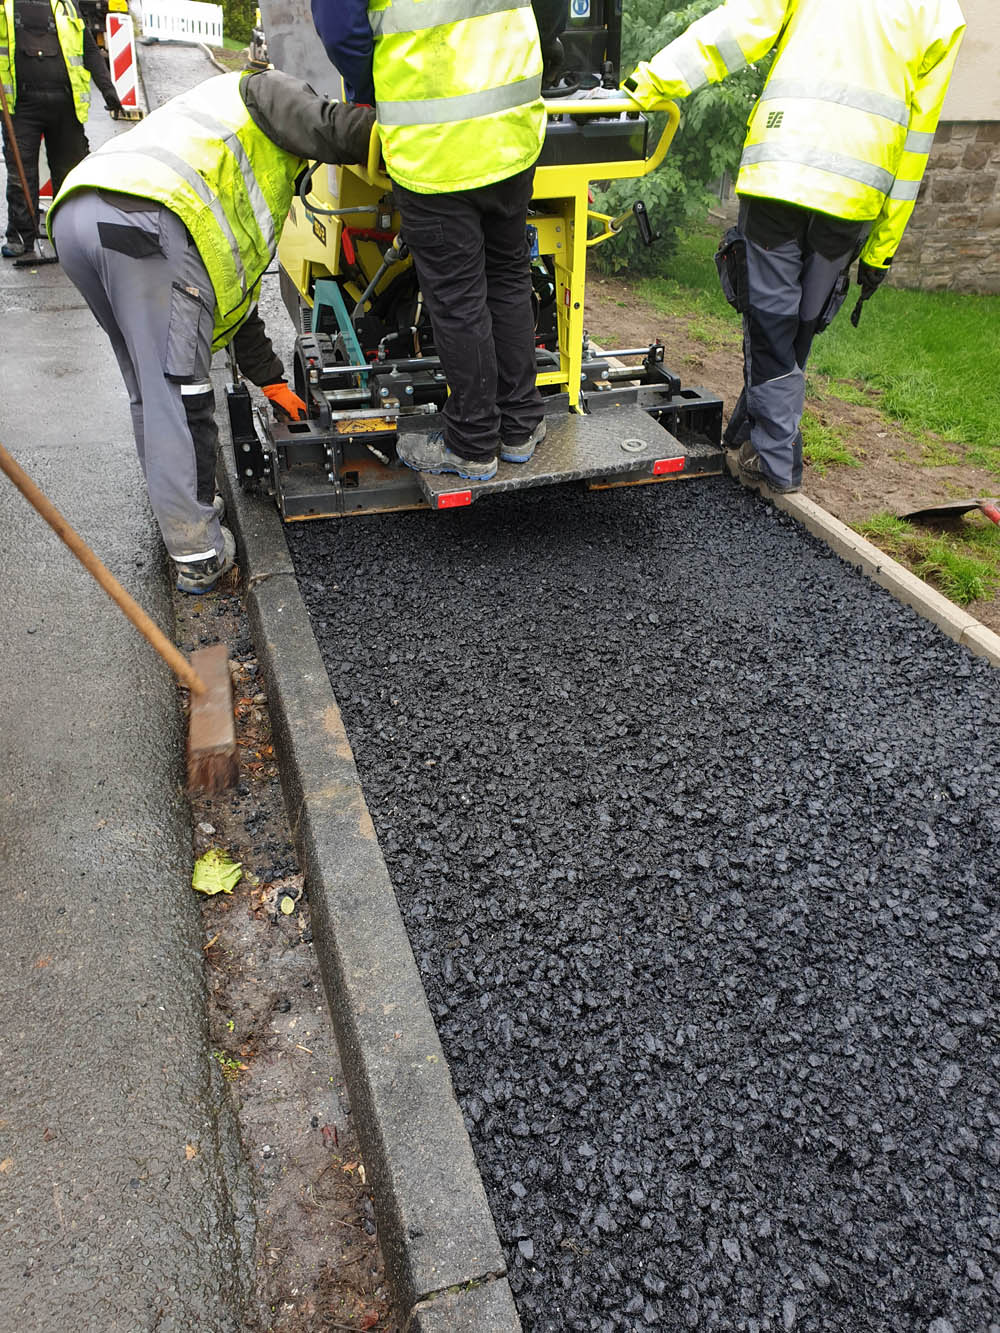 The Ammann compact paver delivered a quality finish for the utility repair work